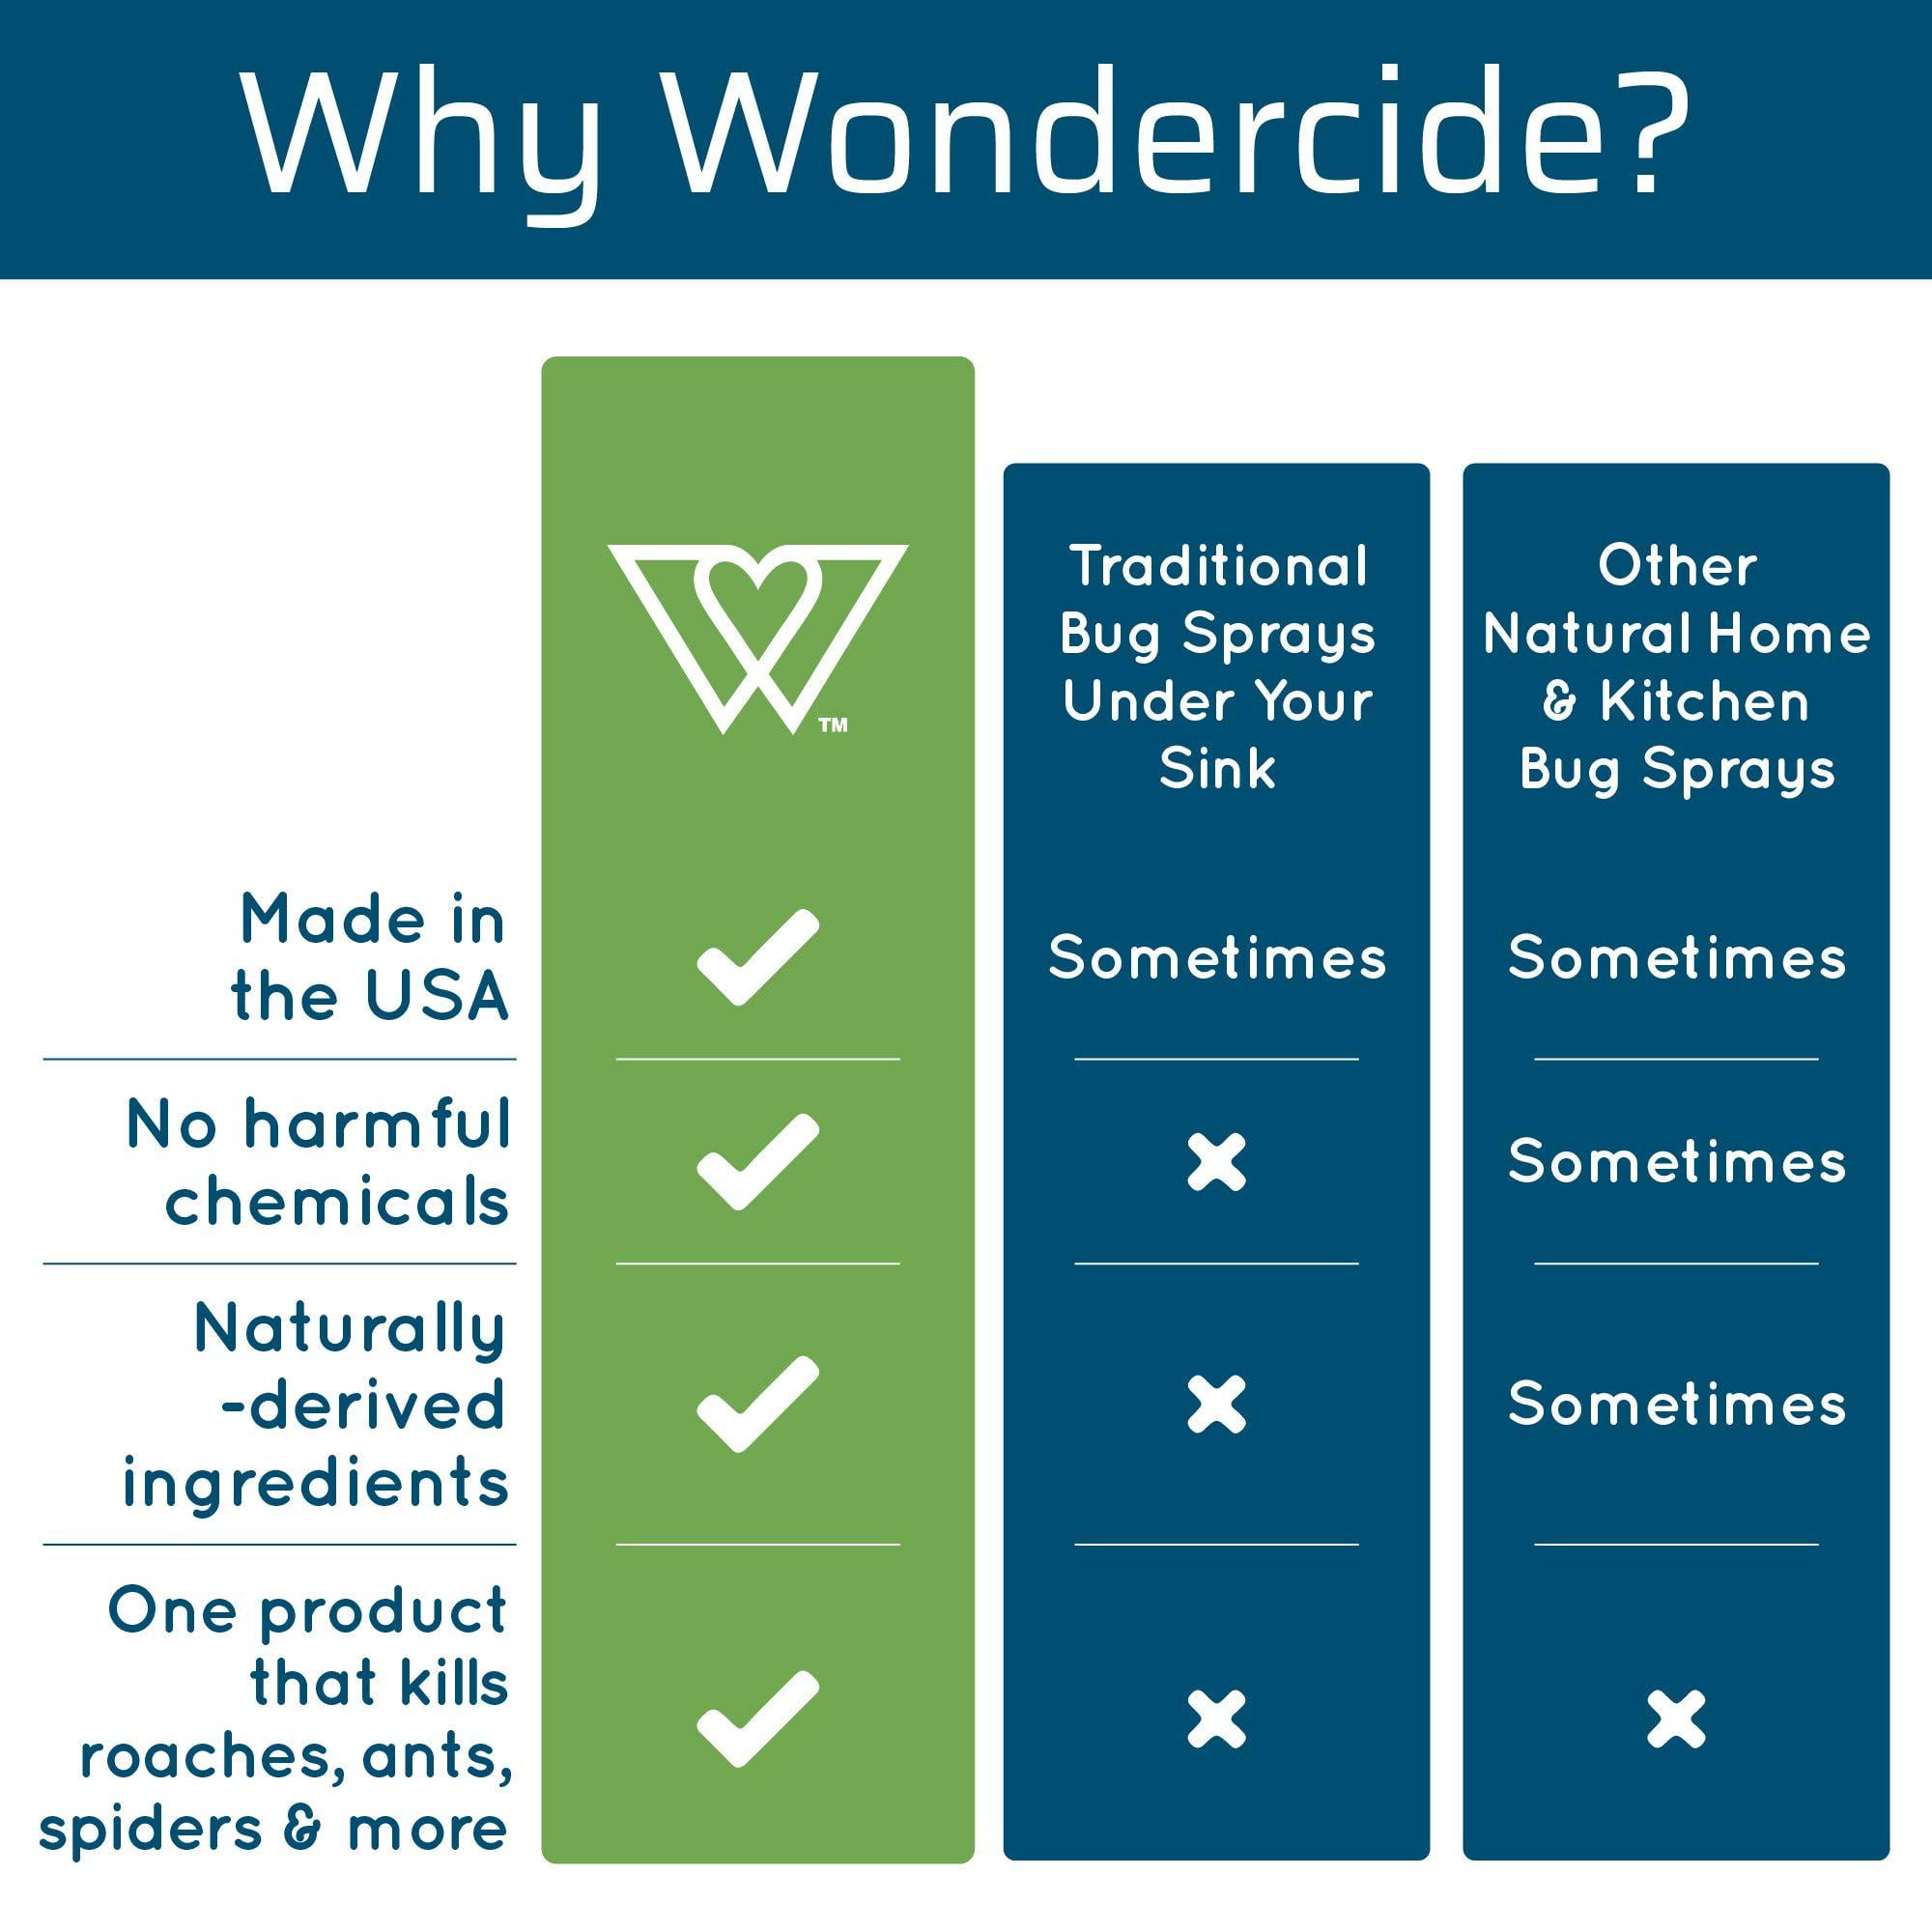 Wondercide Flying Insect Trap | Works on Fruit Flies, Mosquitoes, Gnats, and Moths | Pet and People Friendly | Easy Plug in | for Home & Kitchen